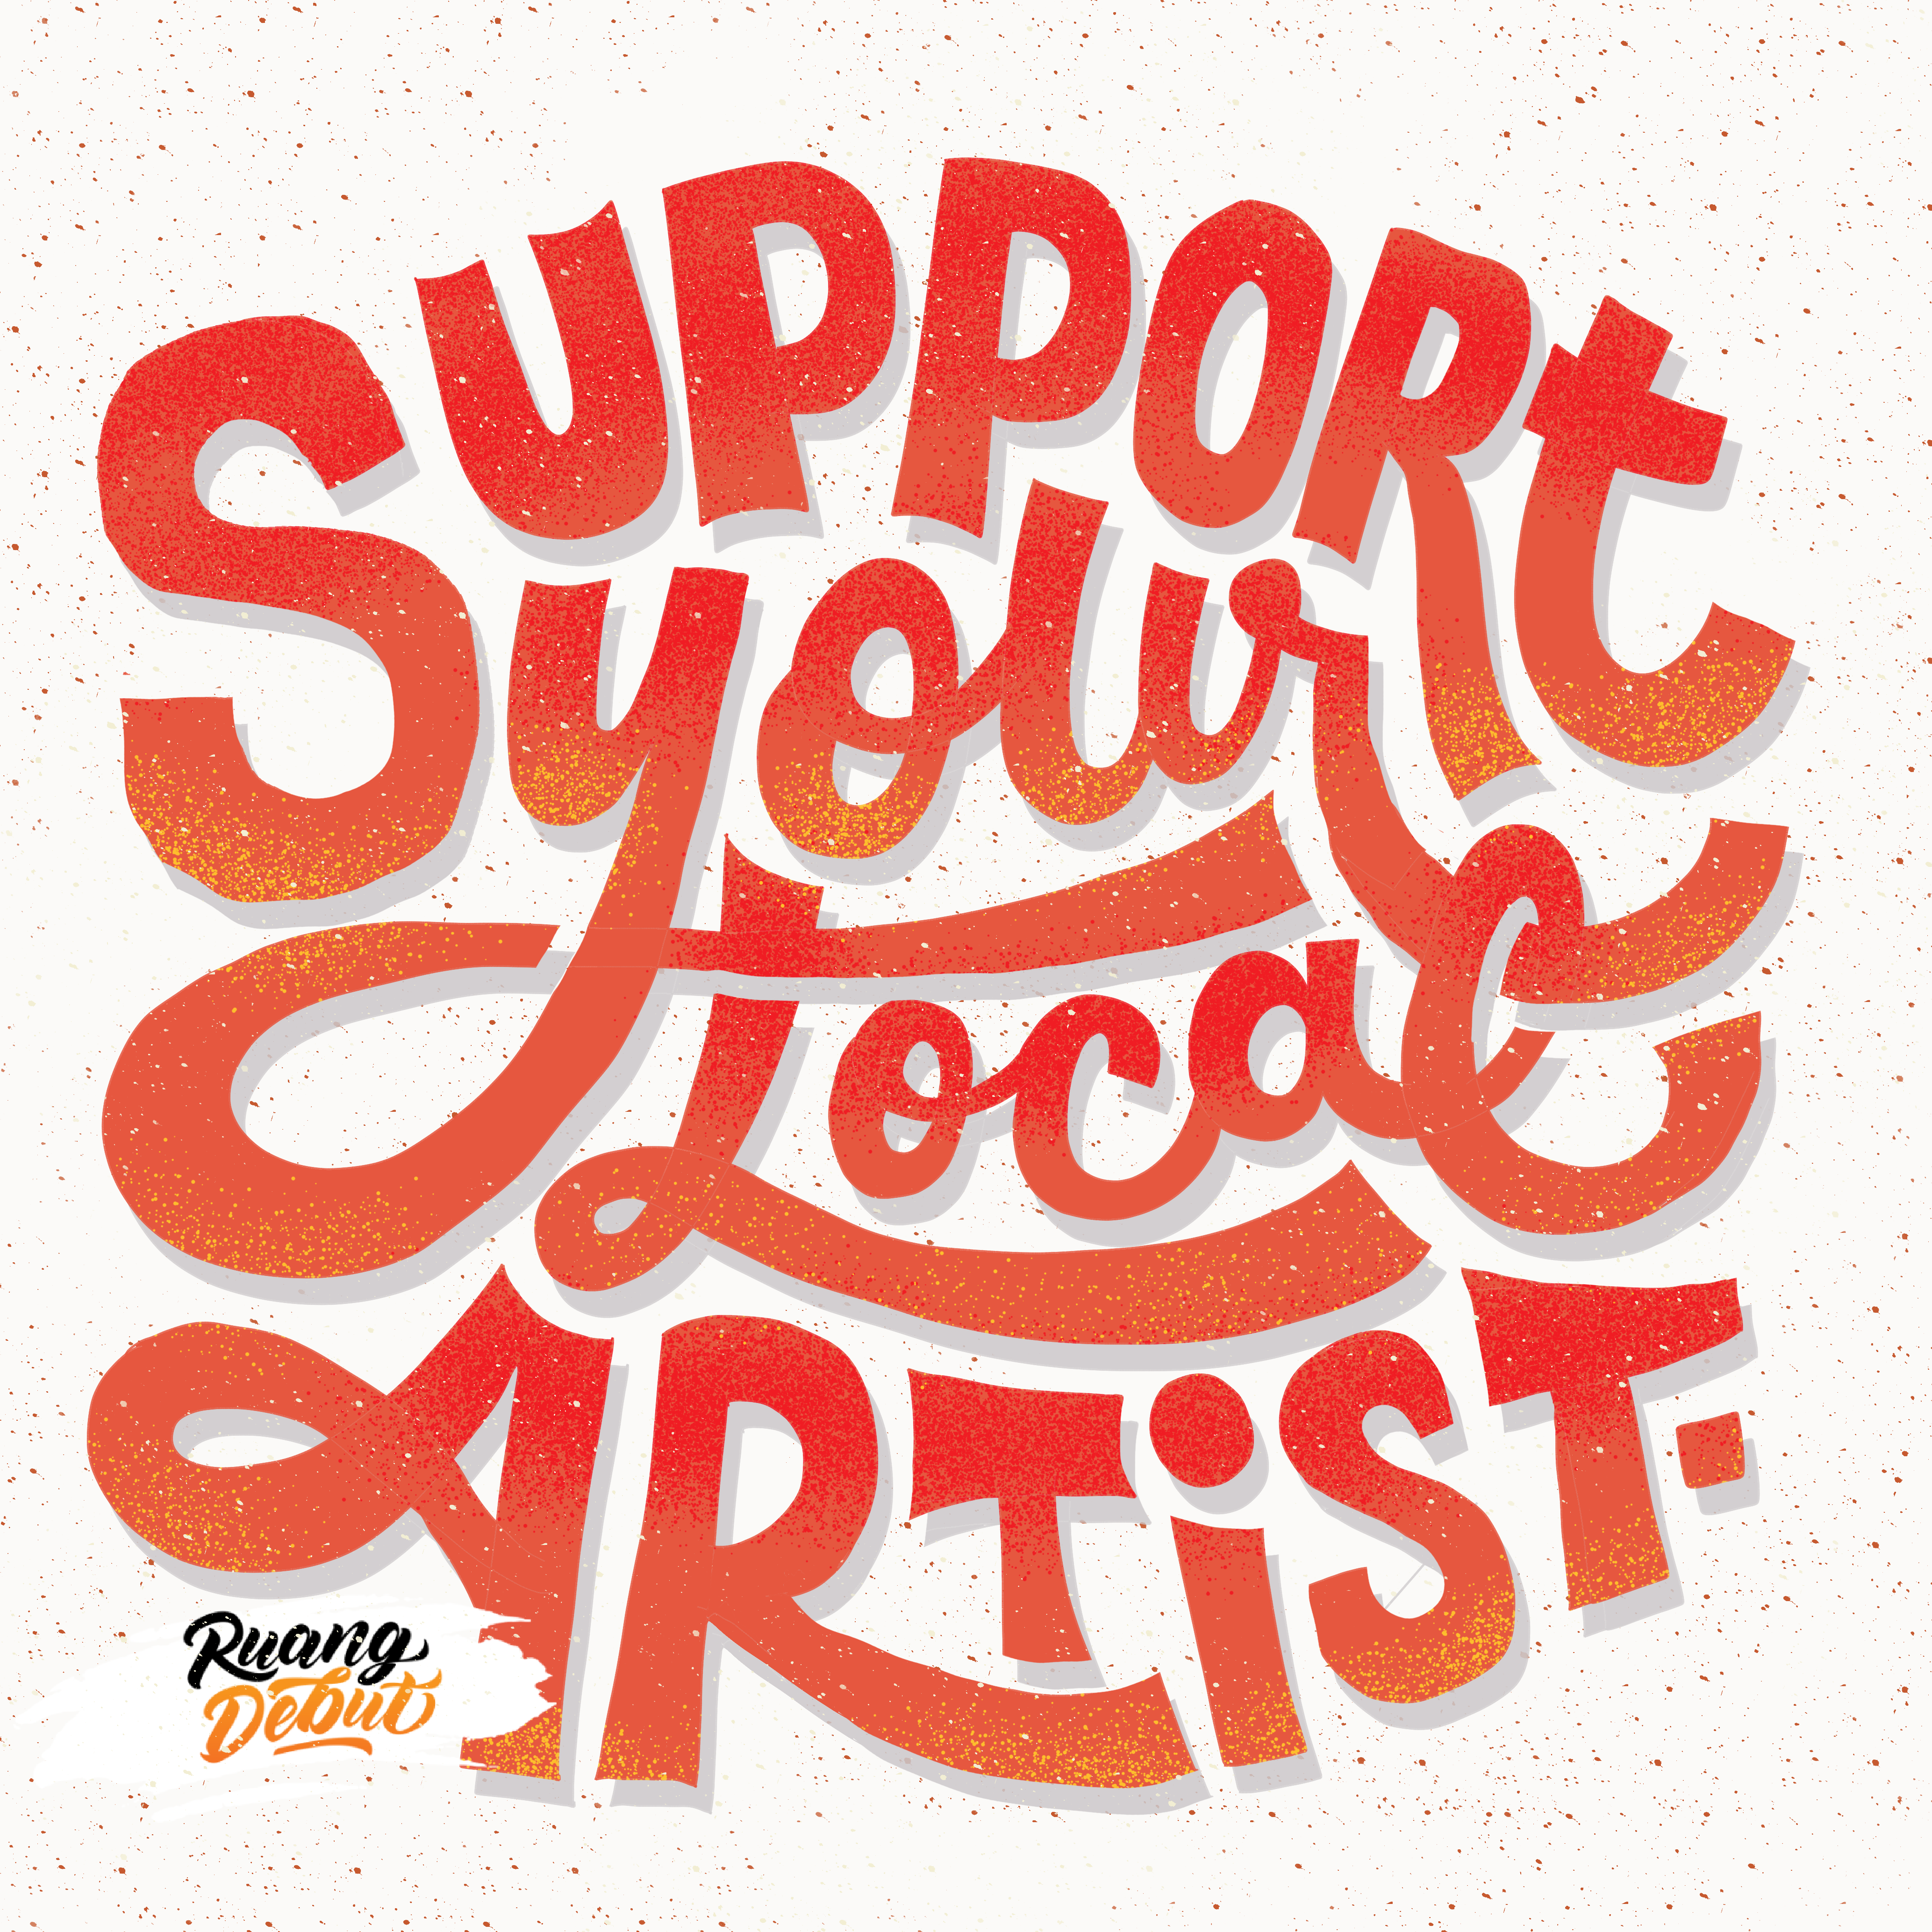 SUPPORT YOUR LOCAL ARTIST - QUOTE LETTERING